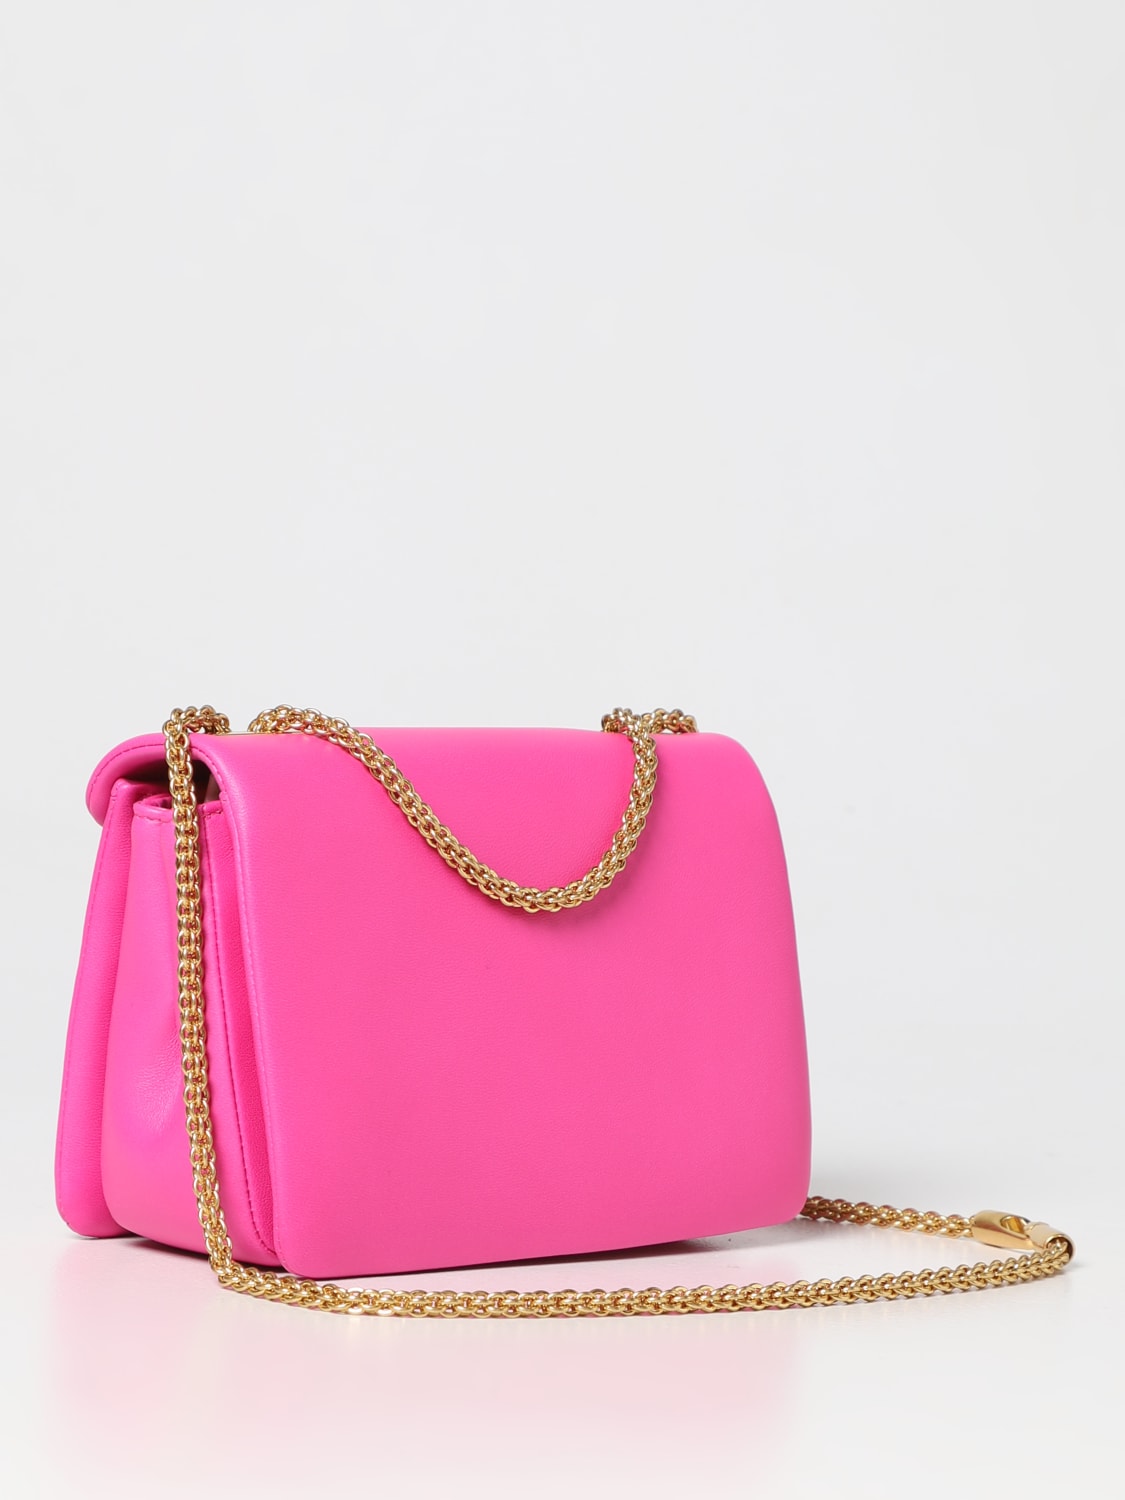 Valentino Garavani One Stud bag in quilted nappa leather